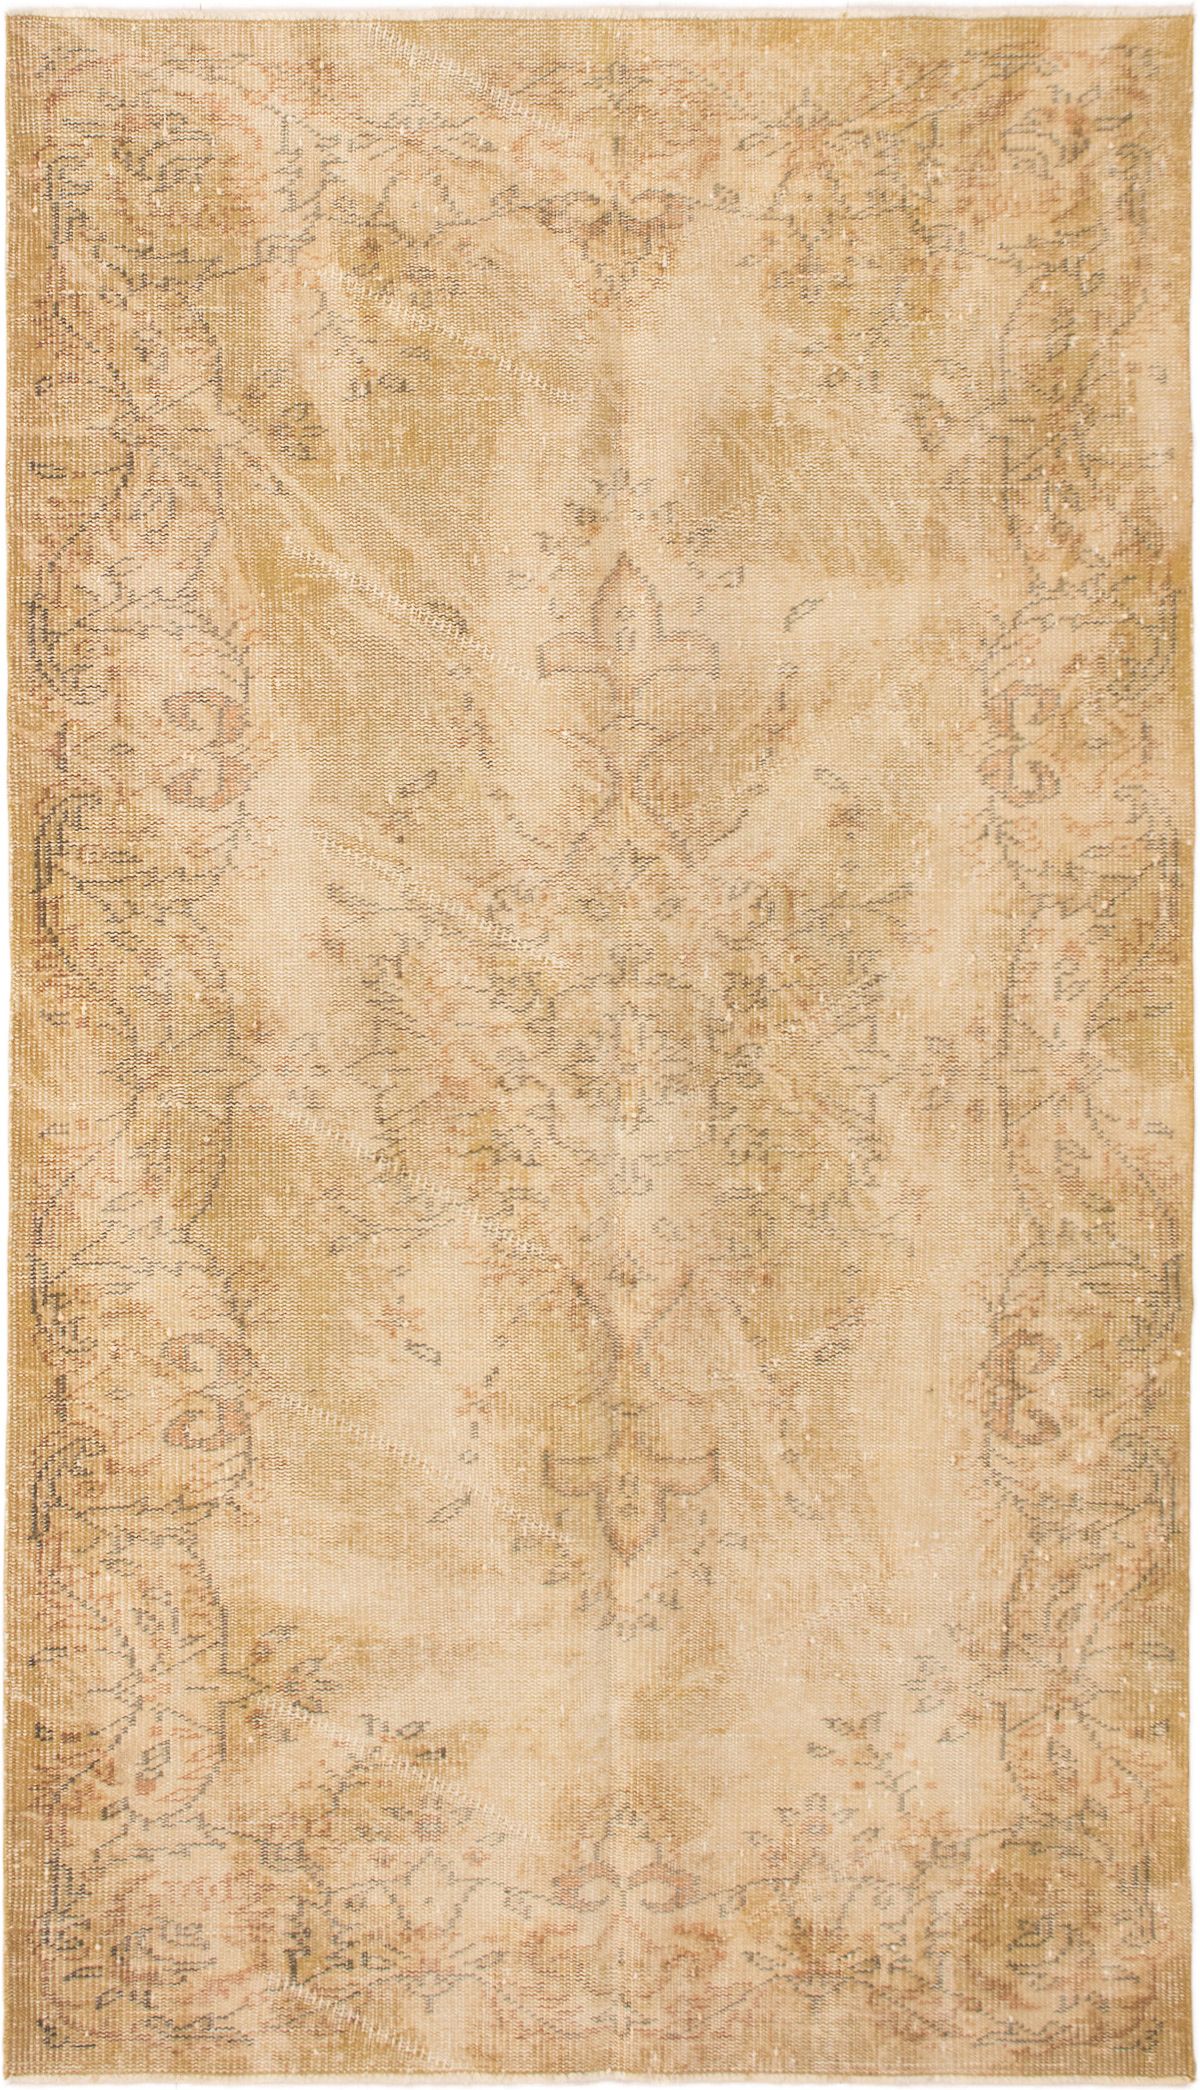 Hand-knotted Antalya Vintage Light Brown Wool Rug 4'6" x 8'1" Size: 4'6" x 8'1"  